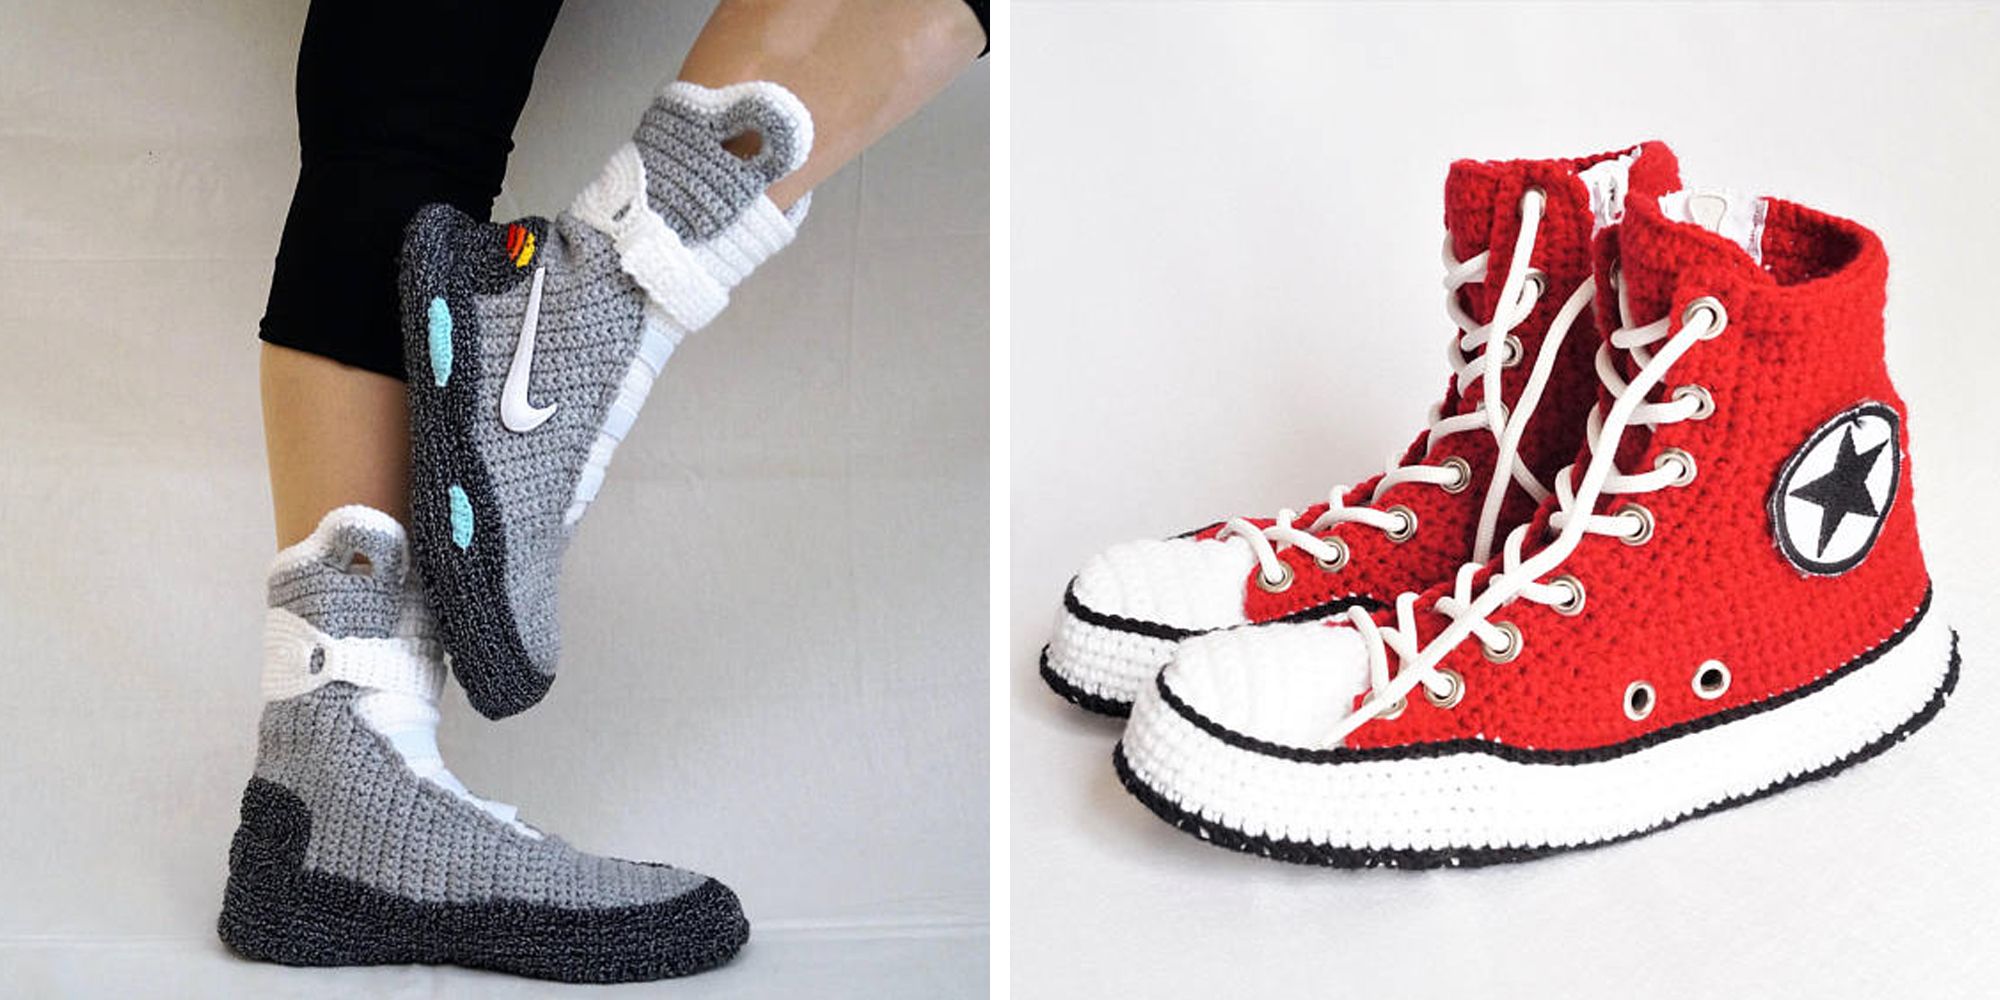 jordan knitted shoes